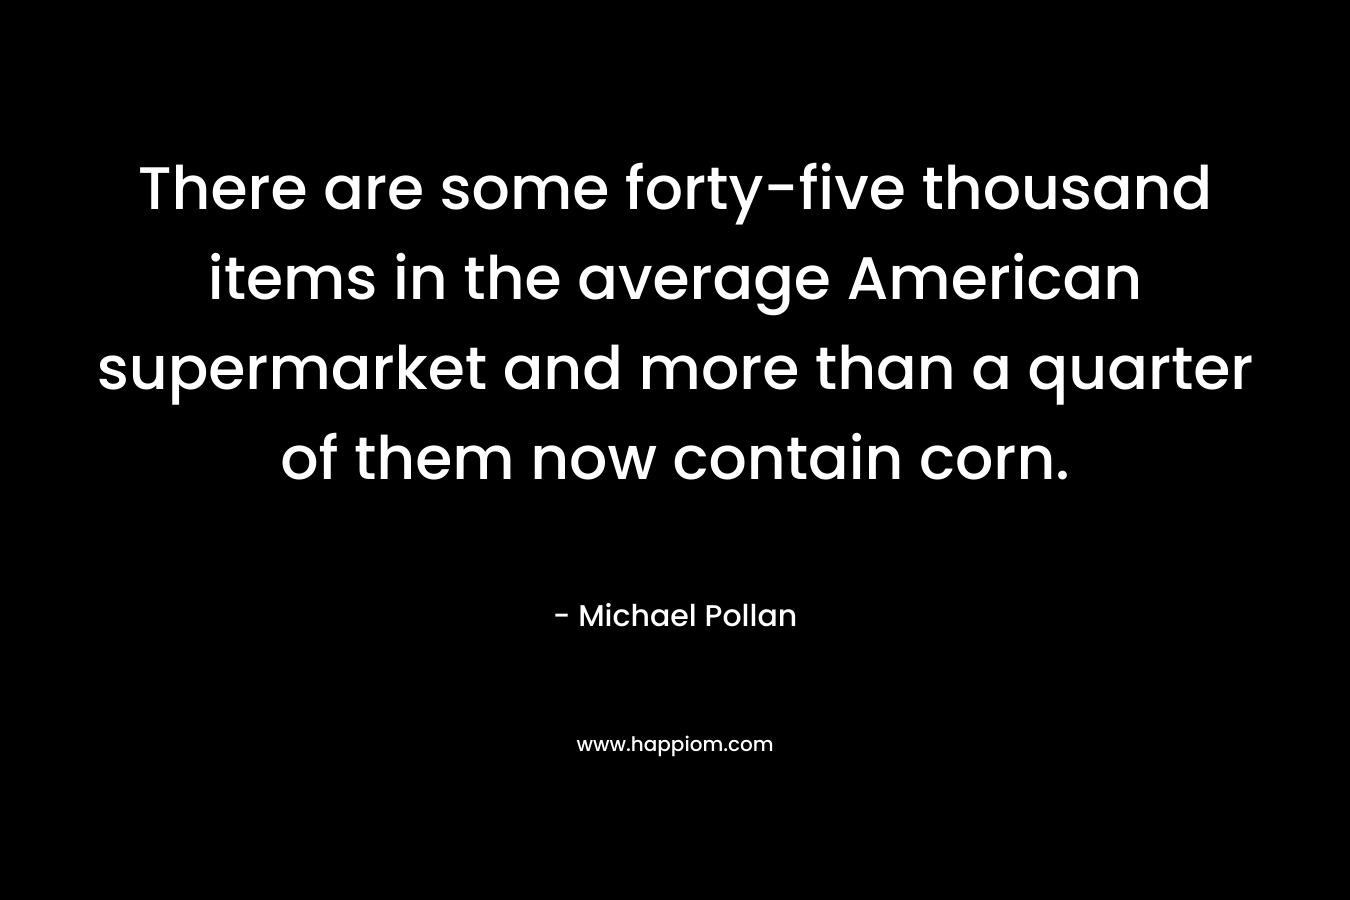 There are some forty-five thousand items in the average American supermarket and more than a quarter of them now contain corn. – Michael Pollan